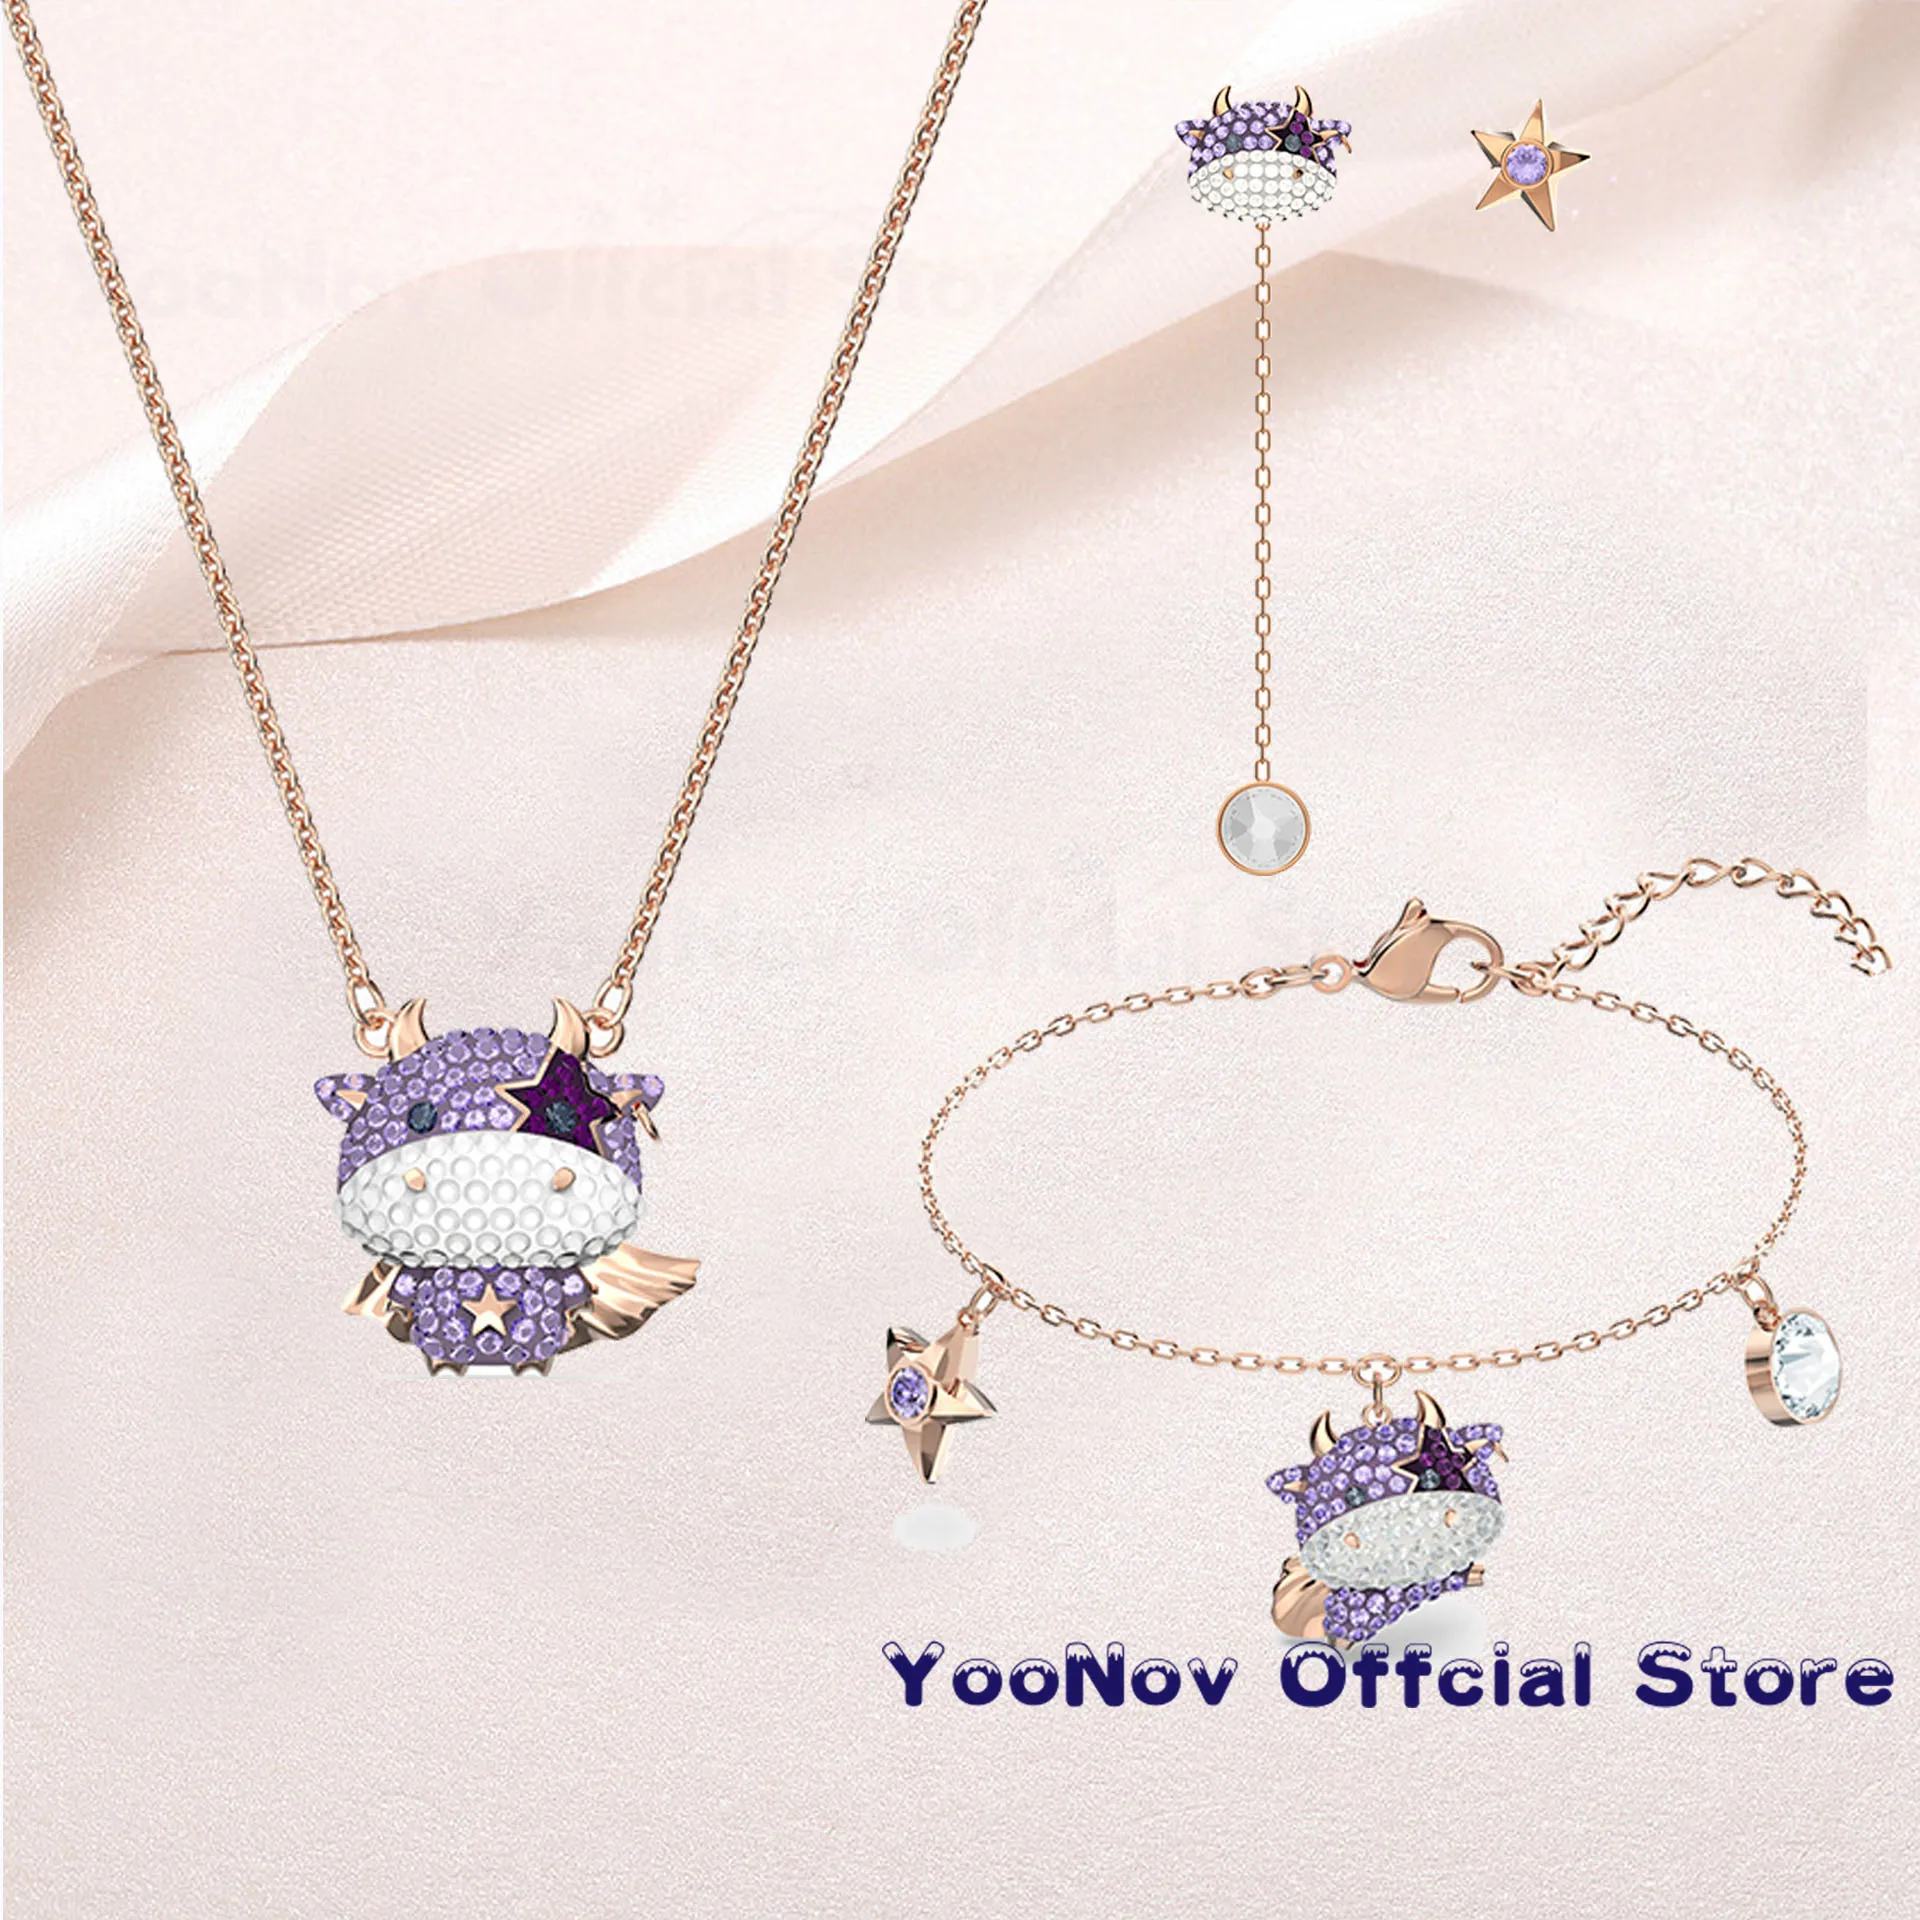 

SWA New 2021 Fashion Jewelry LITTLE Set Rose Gold Charming Violet Calf Decoration Girlfriend Luxury Romantic Gift For Women